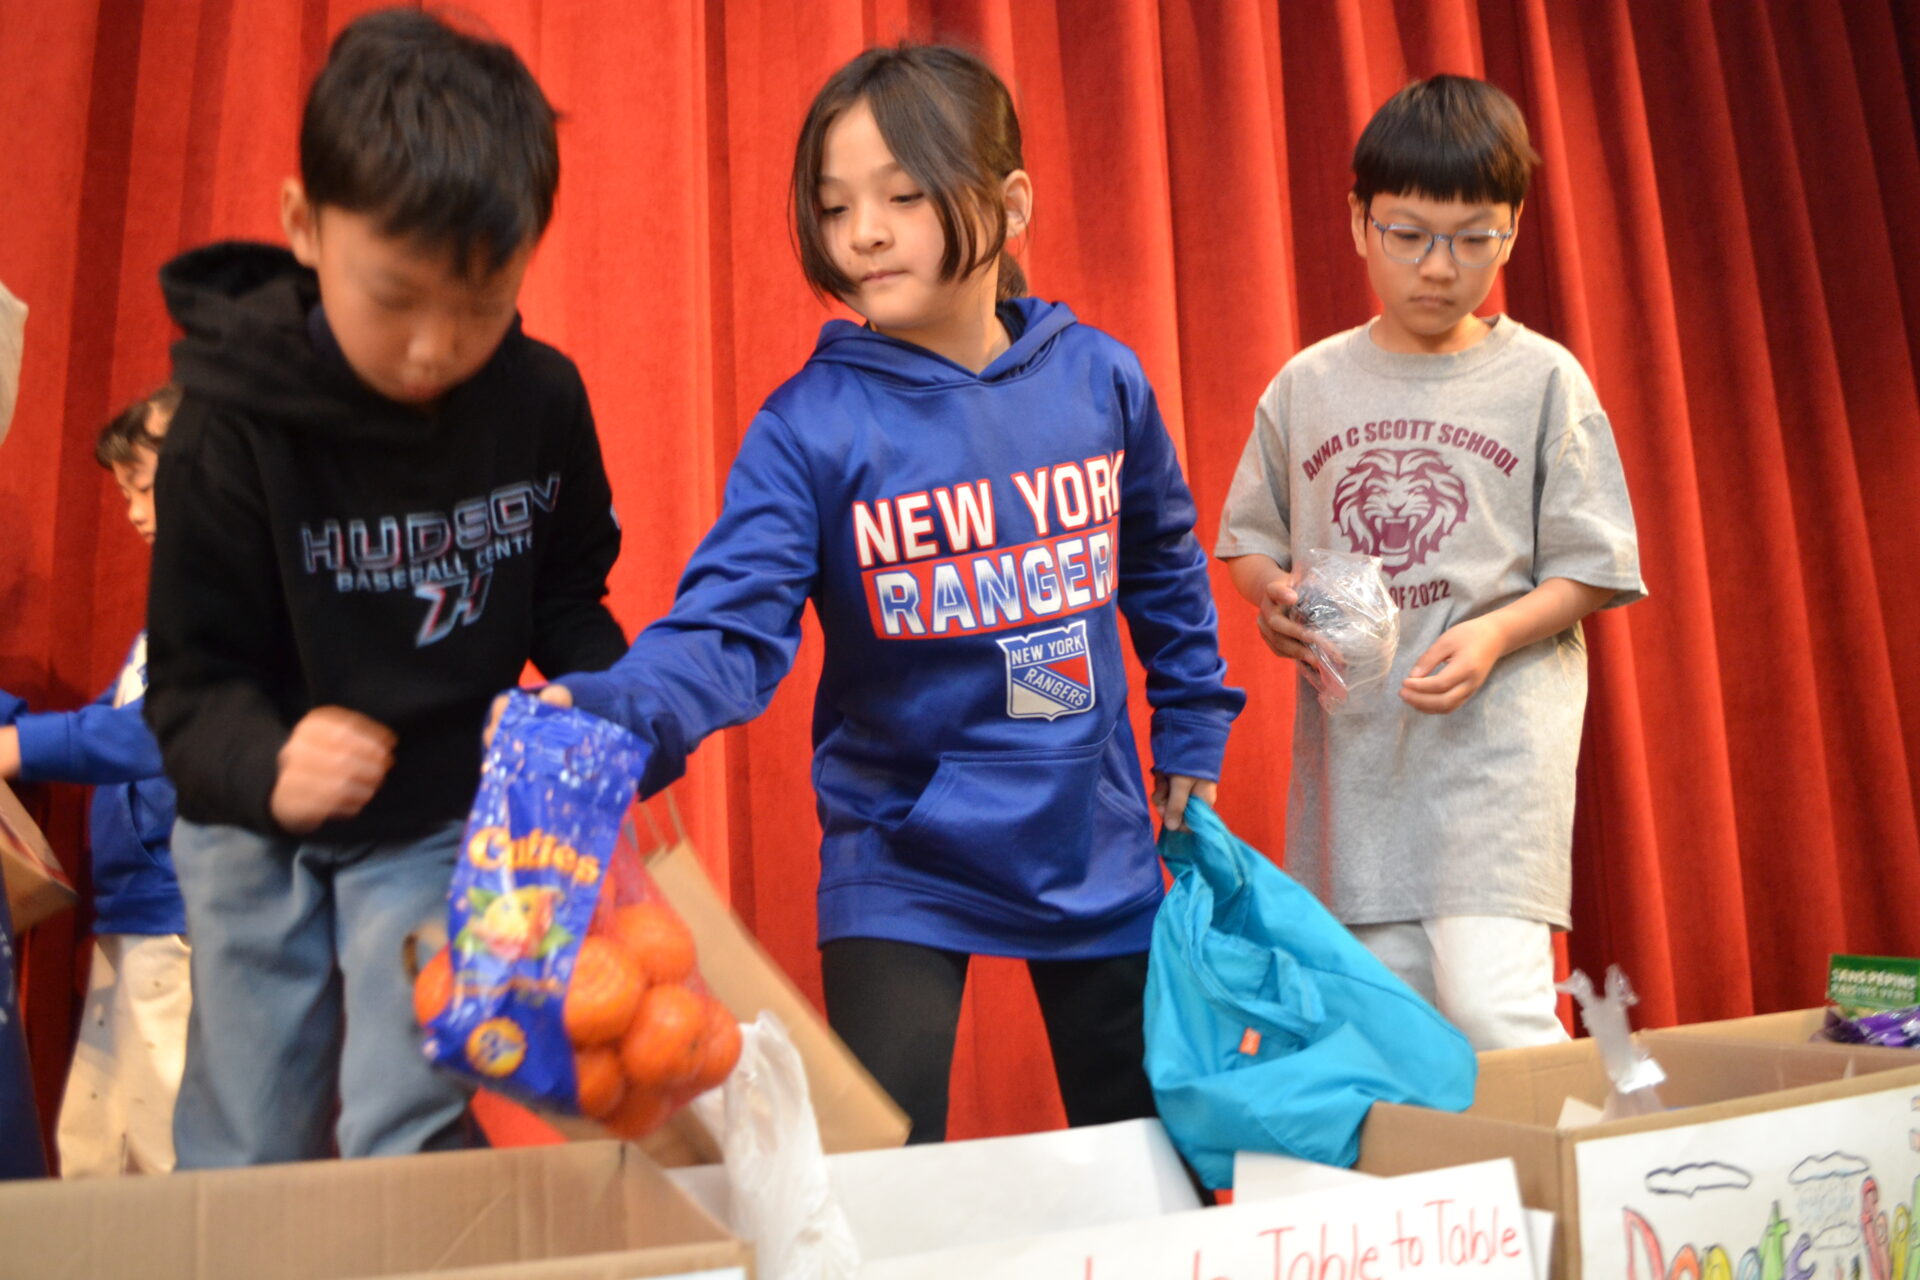 Students at Anna C. Scott Elementary School drop donations in boxes for Table to Table.